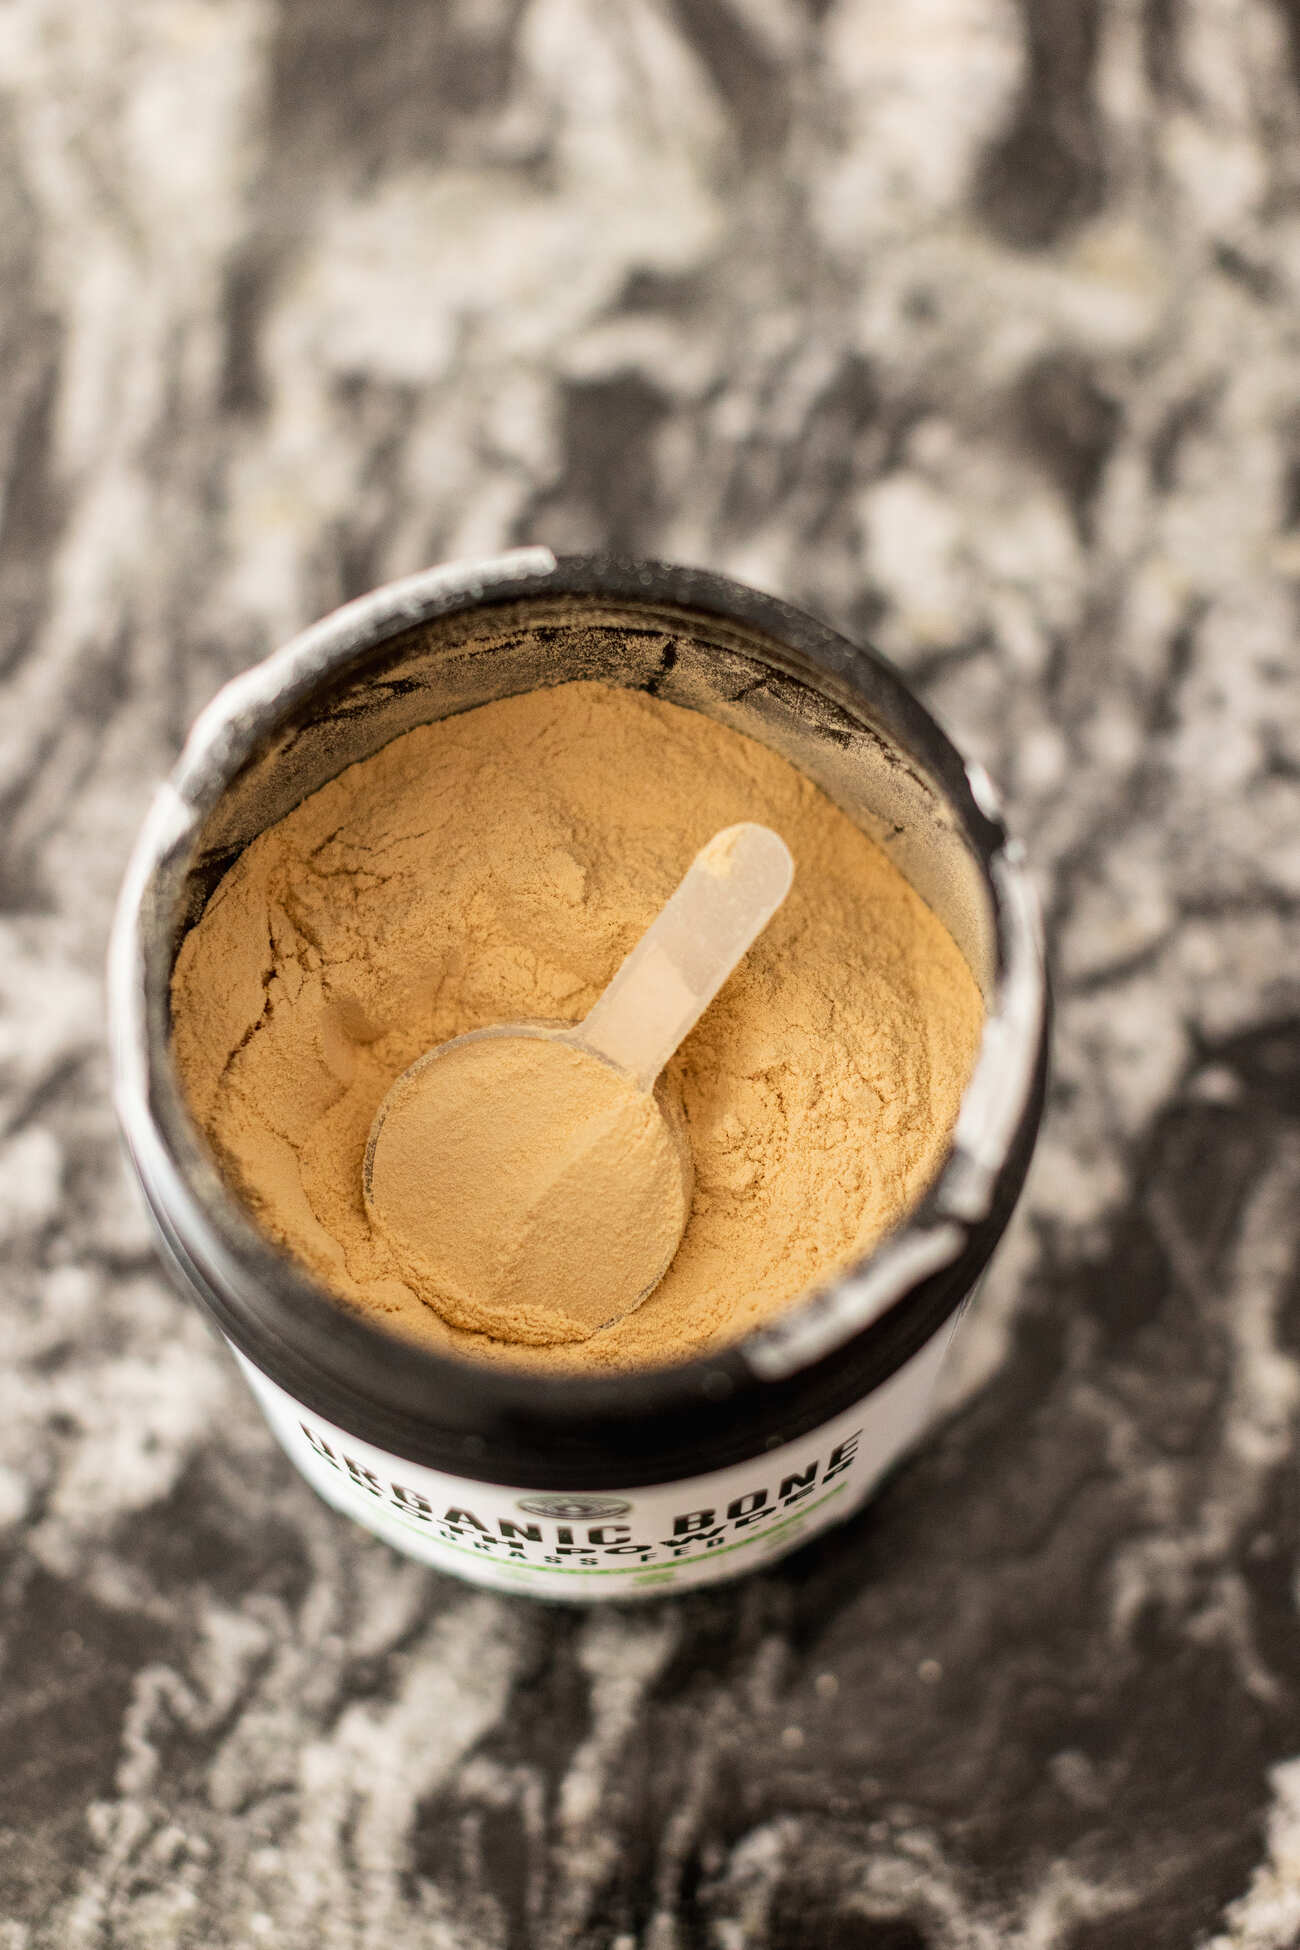 A top view of an open jar of bone broth protein powder with a scoop on a marbled surface